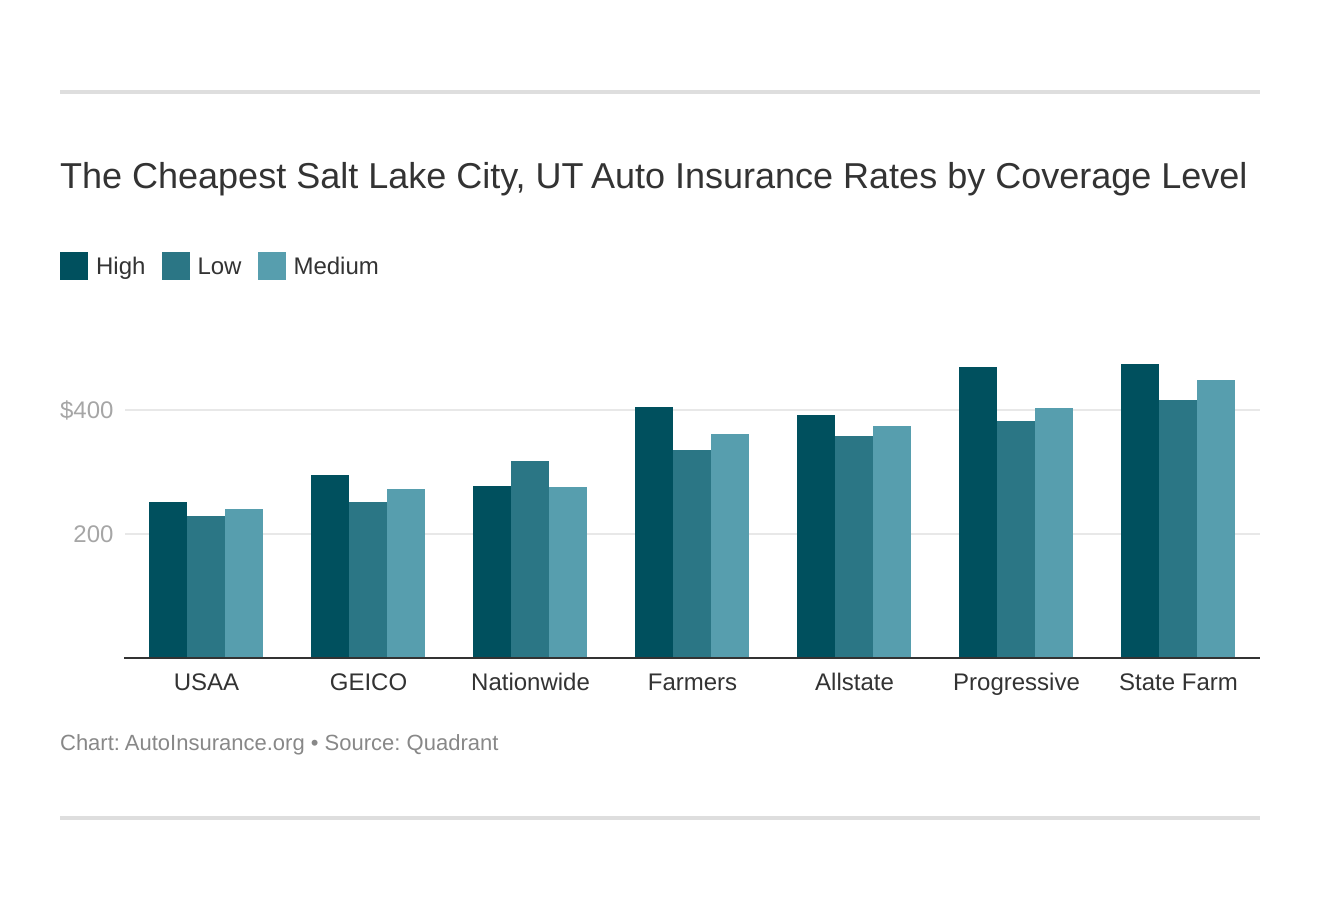 The Cheapest Salt Lake City, UT Auto Insurance Rates by Coverage Level